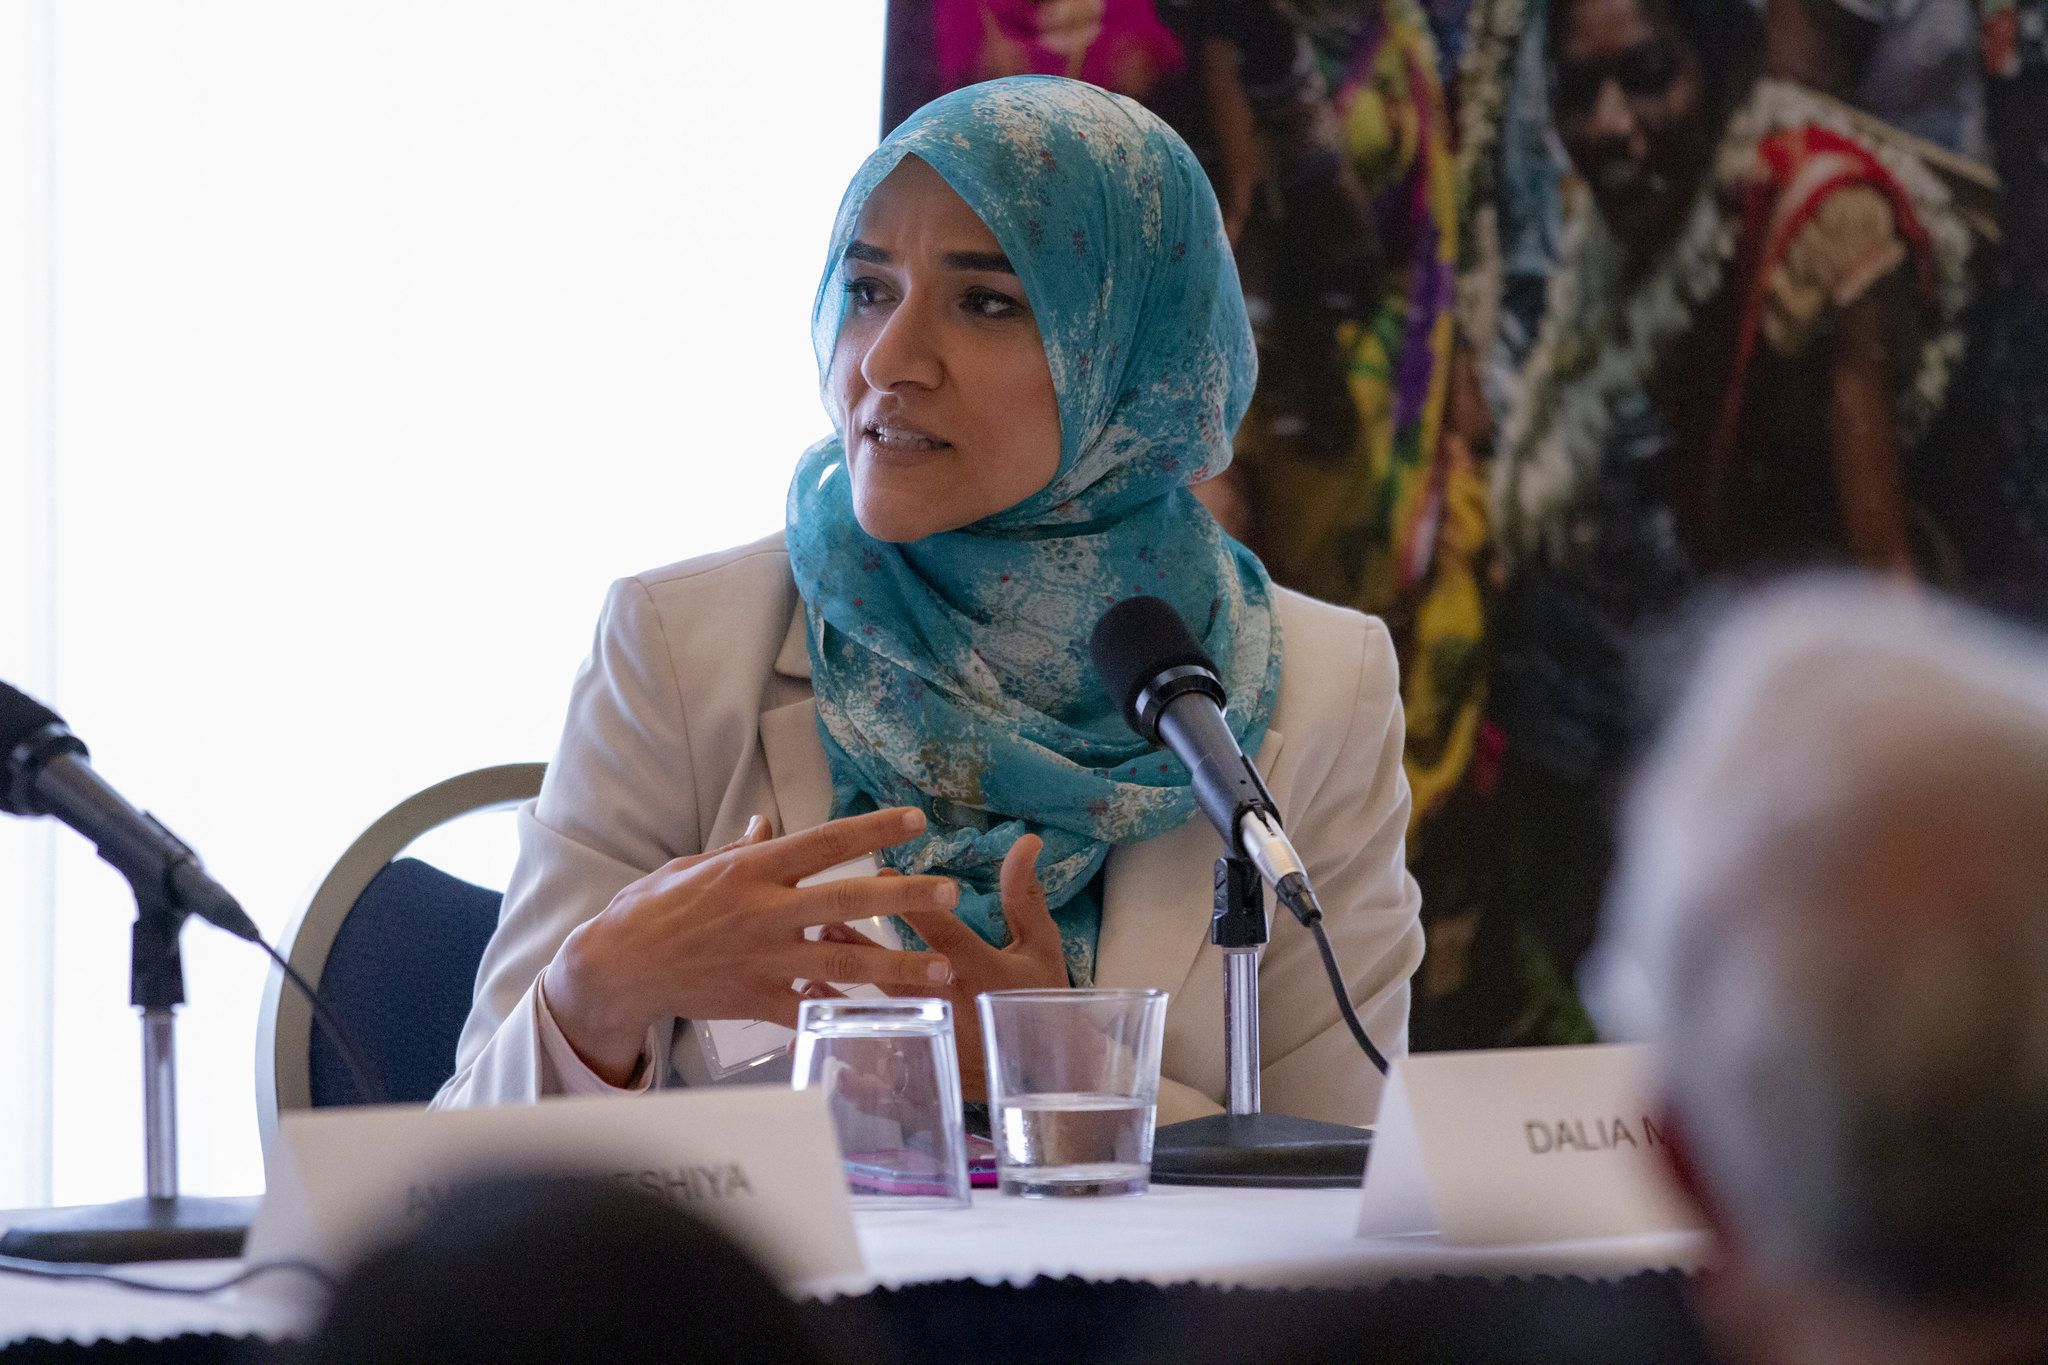 Dalia Mogahed addresses an audience member at the “Beyond Religion” conference. Image by Jin Ding. Washington, D.C., 2019.